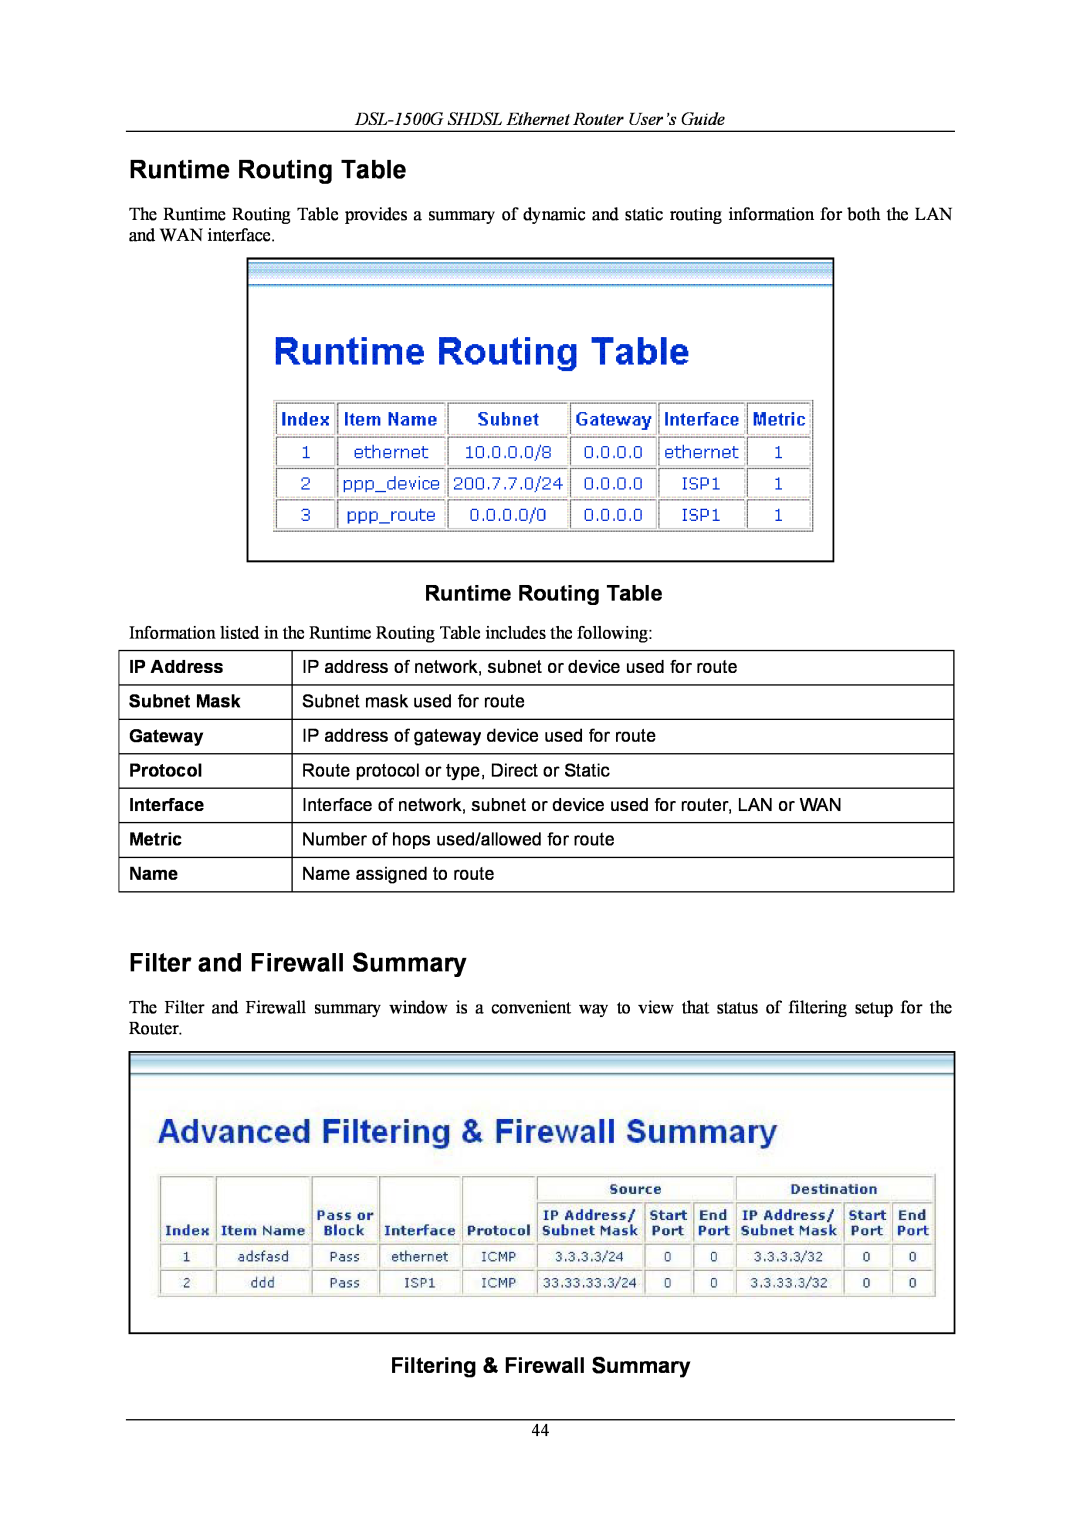 D-Link DSL-1500G manual Runtime Routing Table, Filter and Firewall Summary, Filtering & Firewall Summary 